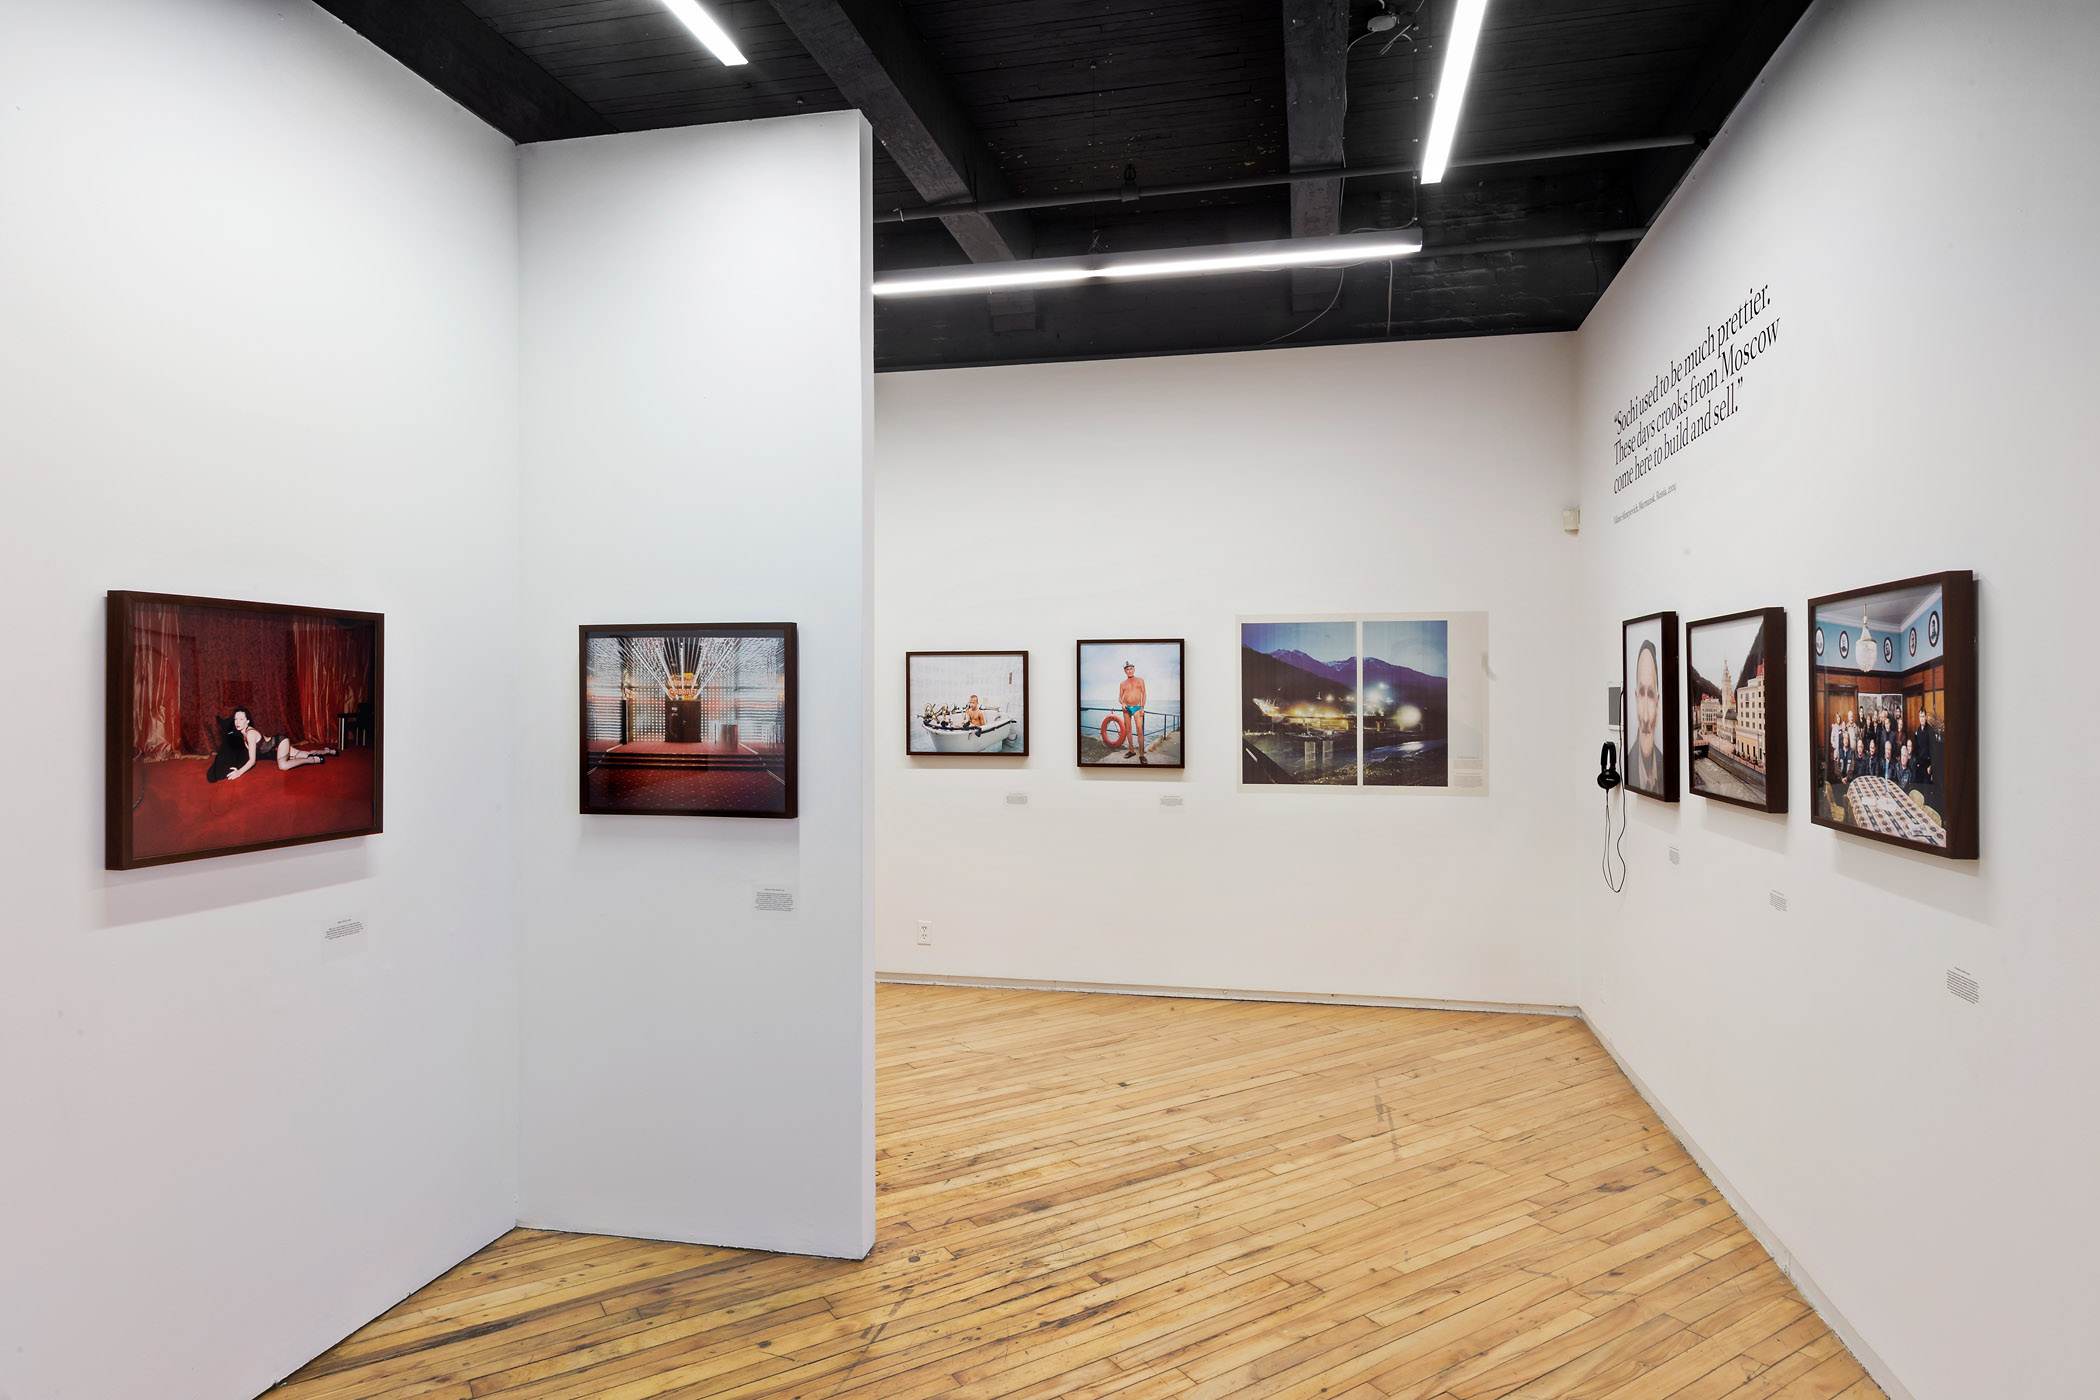     Installation view, The Sochi Project: An Atlas of War and Tourism in the Caucasus,  Photo Â© Toni Hafkenscheid

